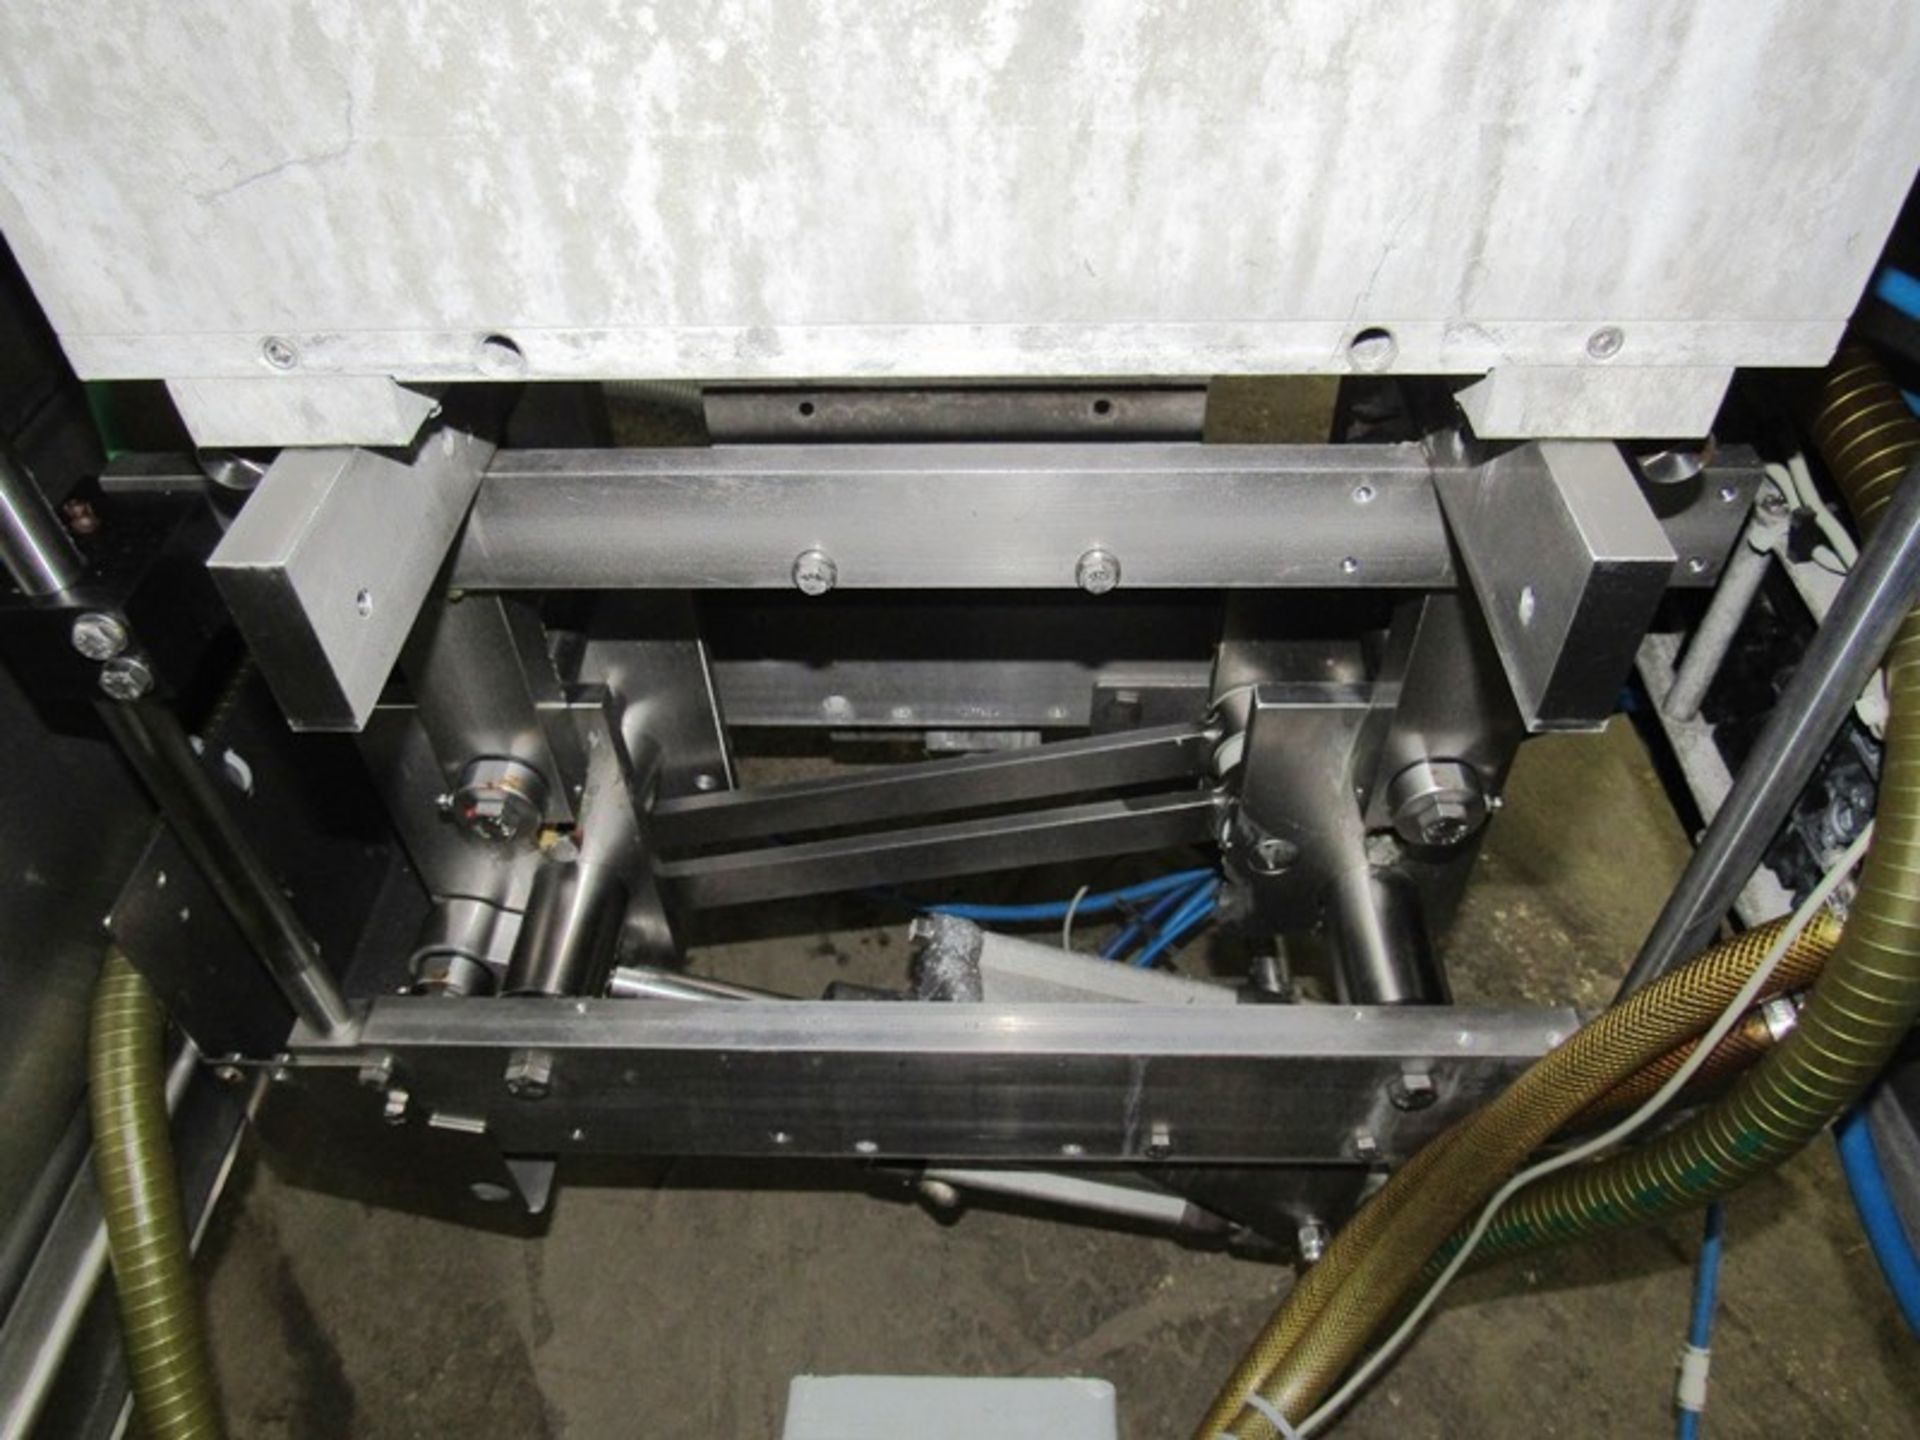 Multivac Mdl. R240 Rollstock Thermoforming Packager, Ser. #106852, approx. 450 mm between chains, - Image 26 of 31